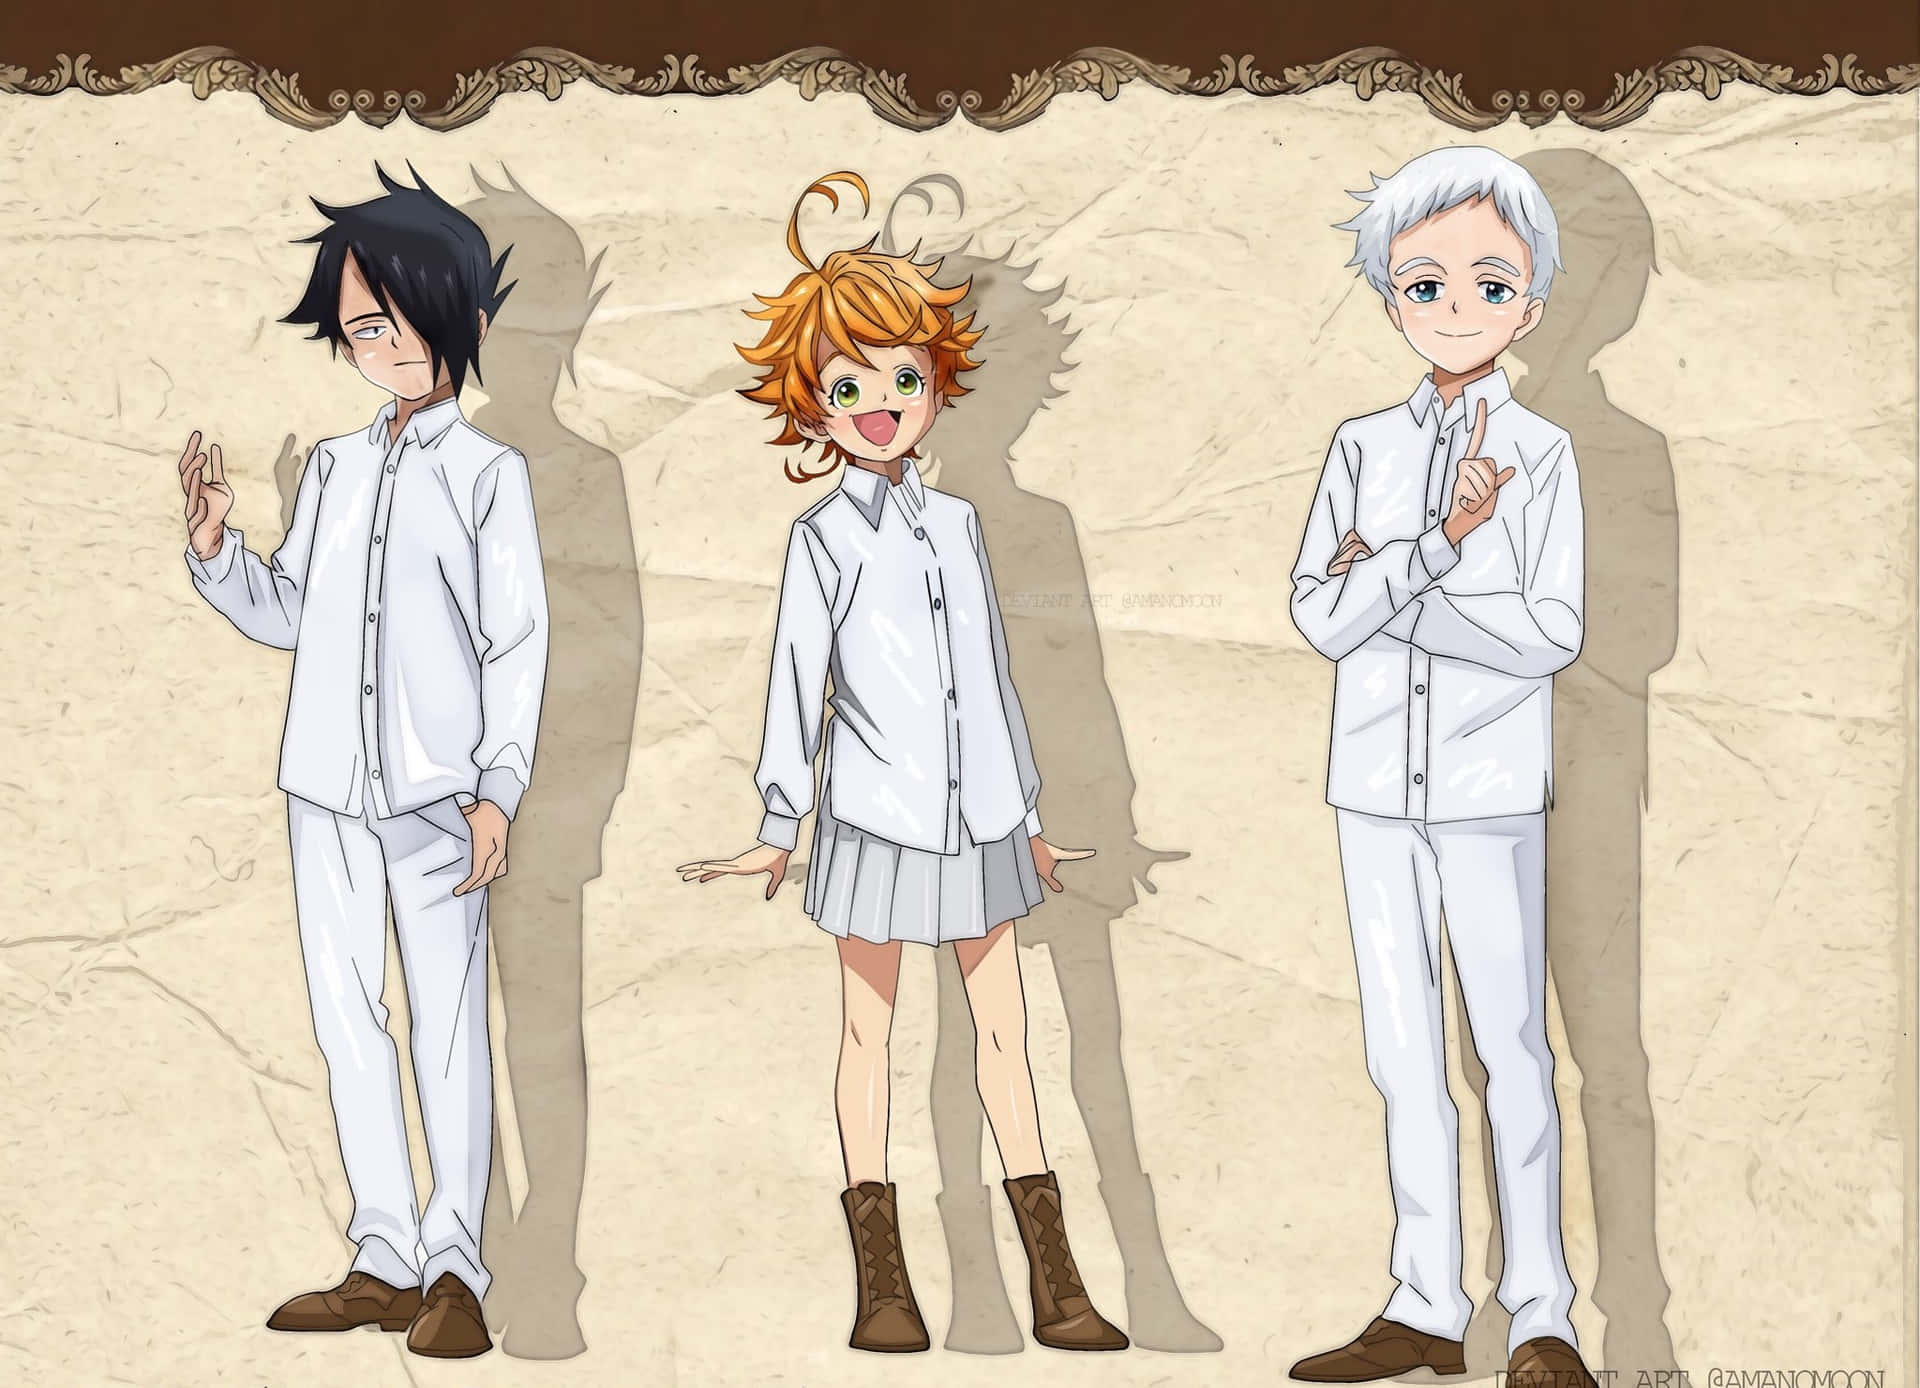 Ray (The Promised Neverland)